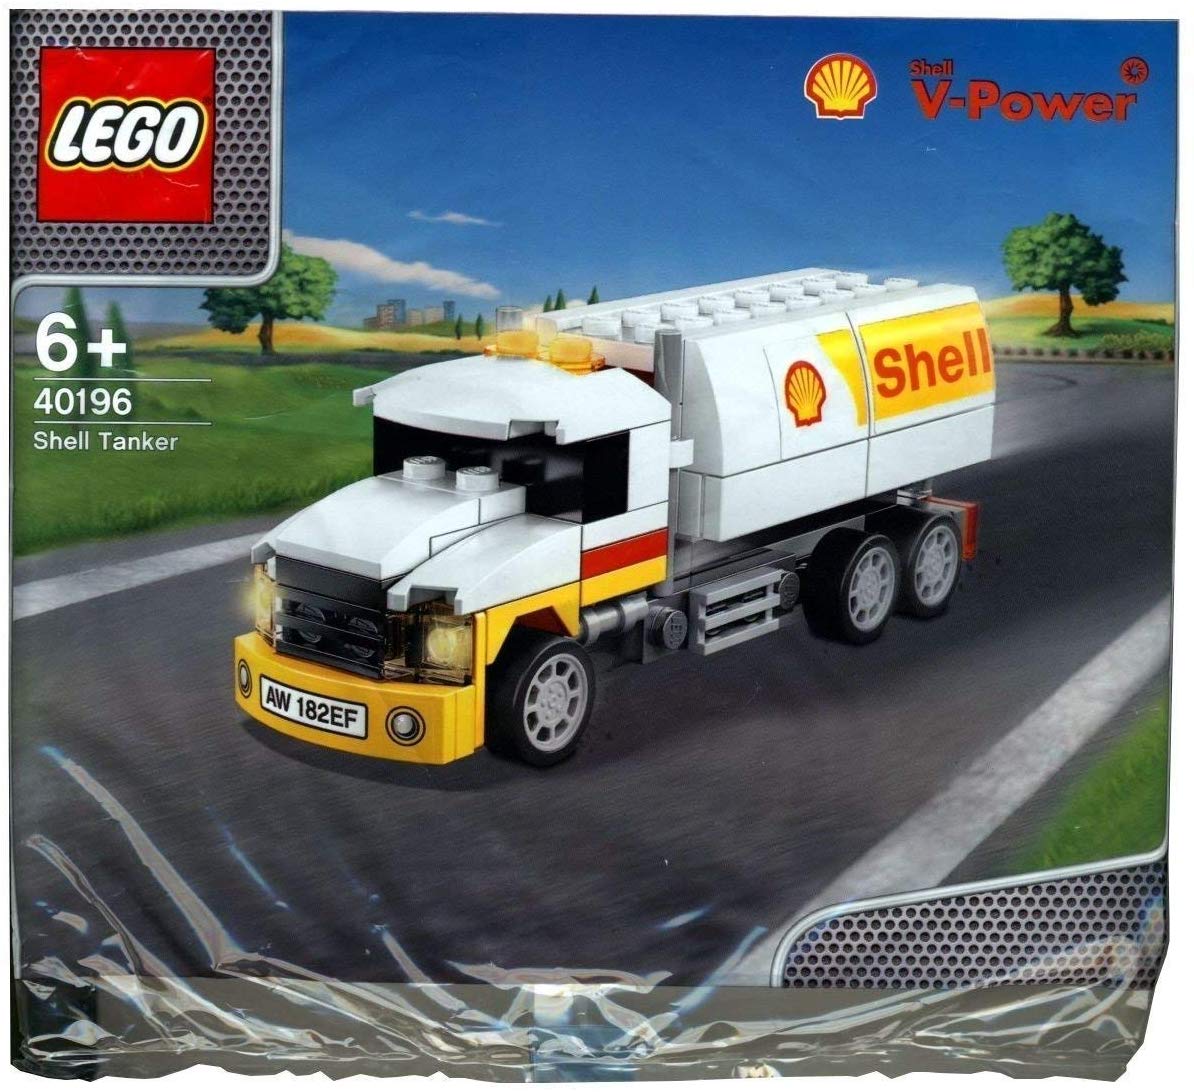 2014 The New Shell V-Power Lego Collection Shell Tanker Polybag 40196 Limit